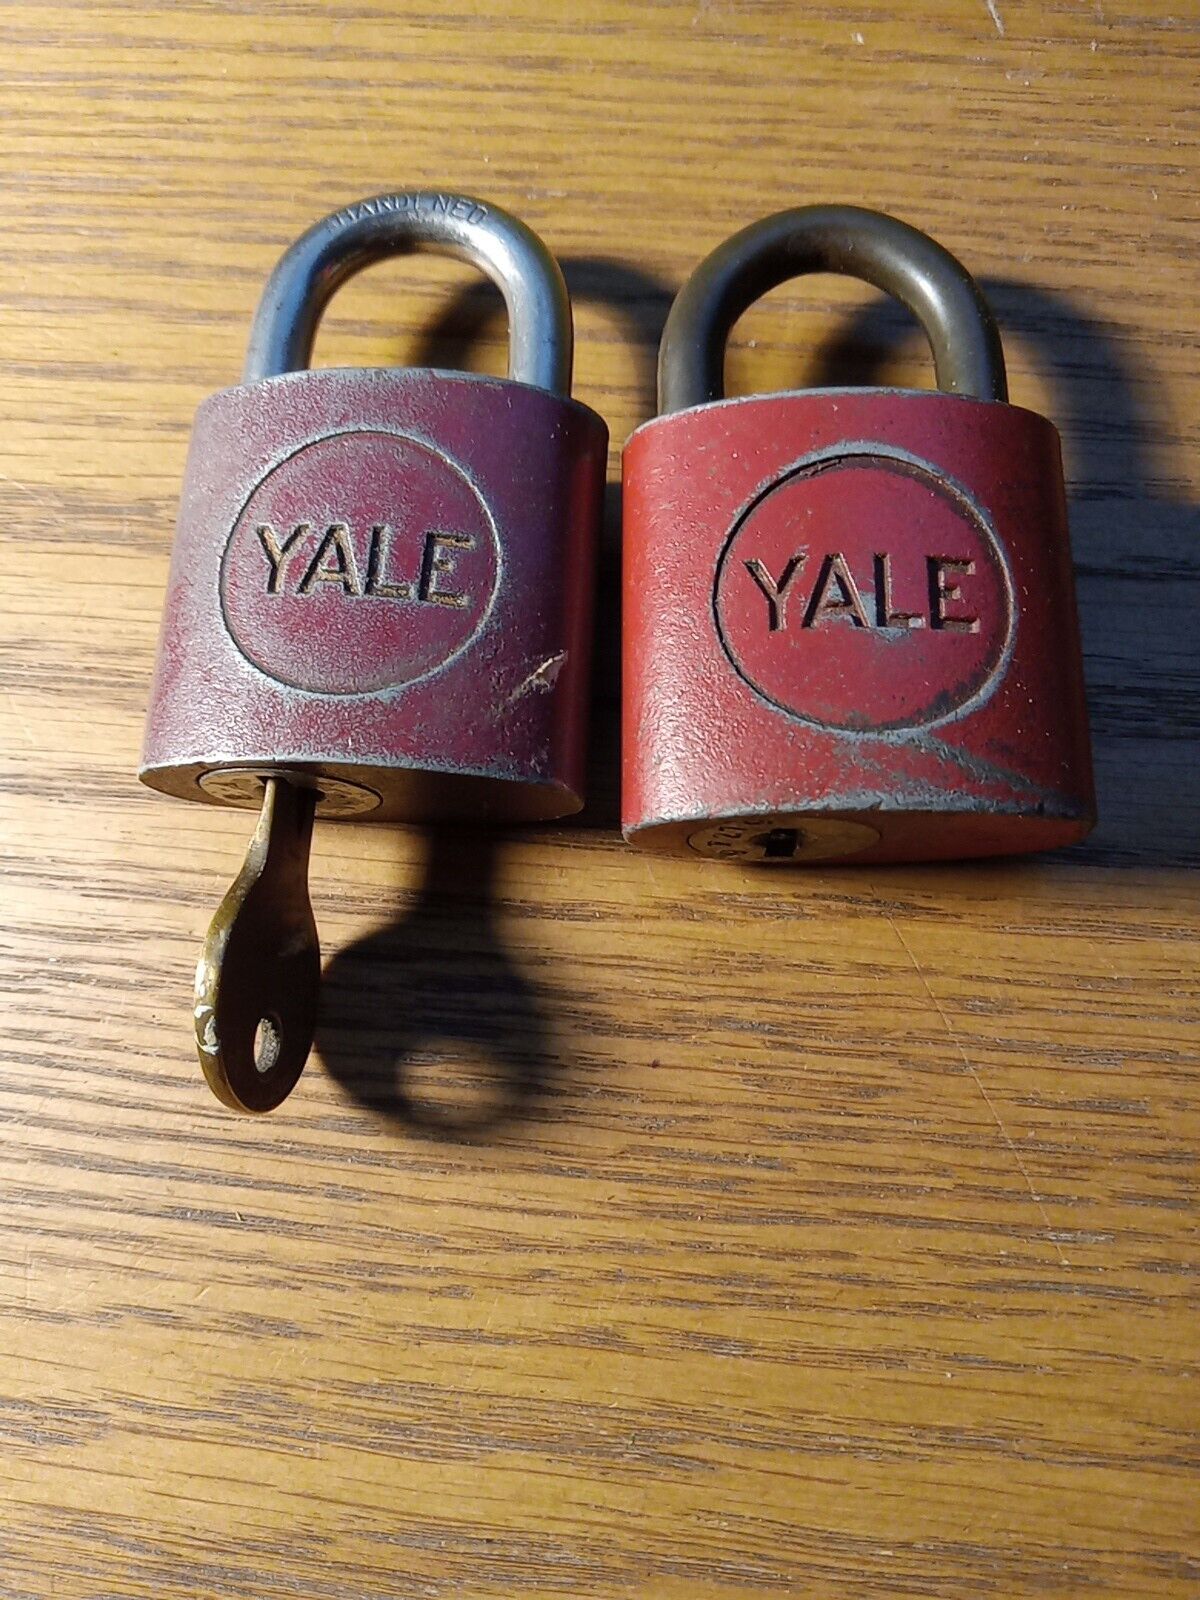 2 Antique 1940s Yale PadLocks one with Key one with no key, Stamped 8f001, Gf27g